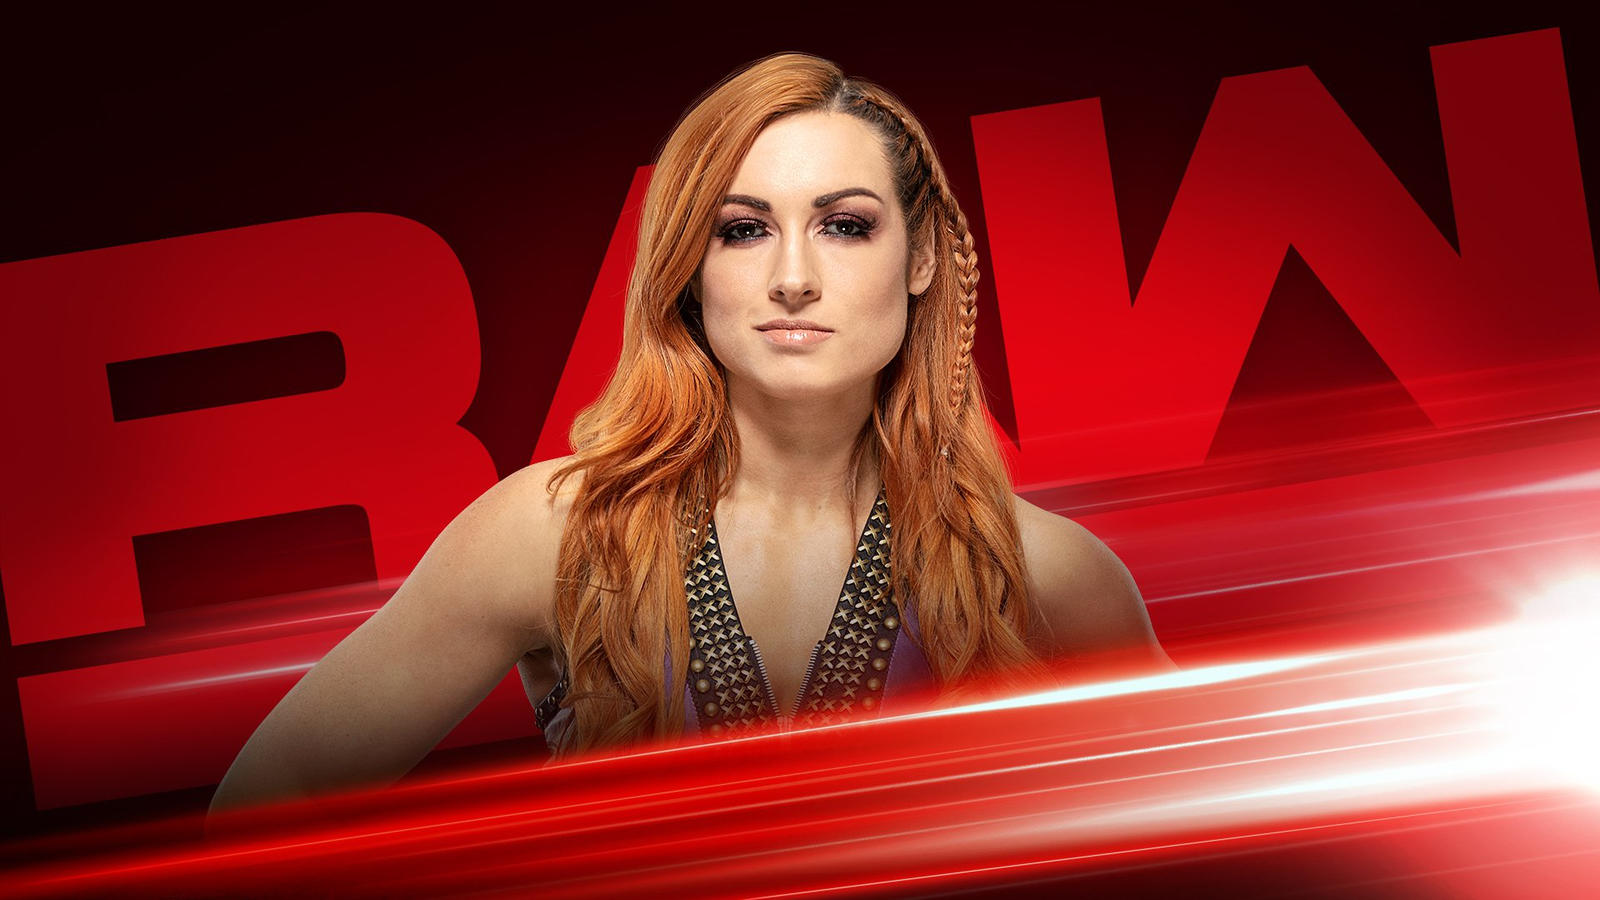 Wwe raw becky lynch invited back to raw by the mcmahon family after controversial actions last week th february